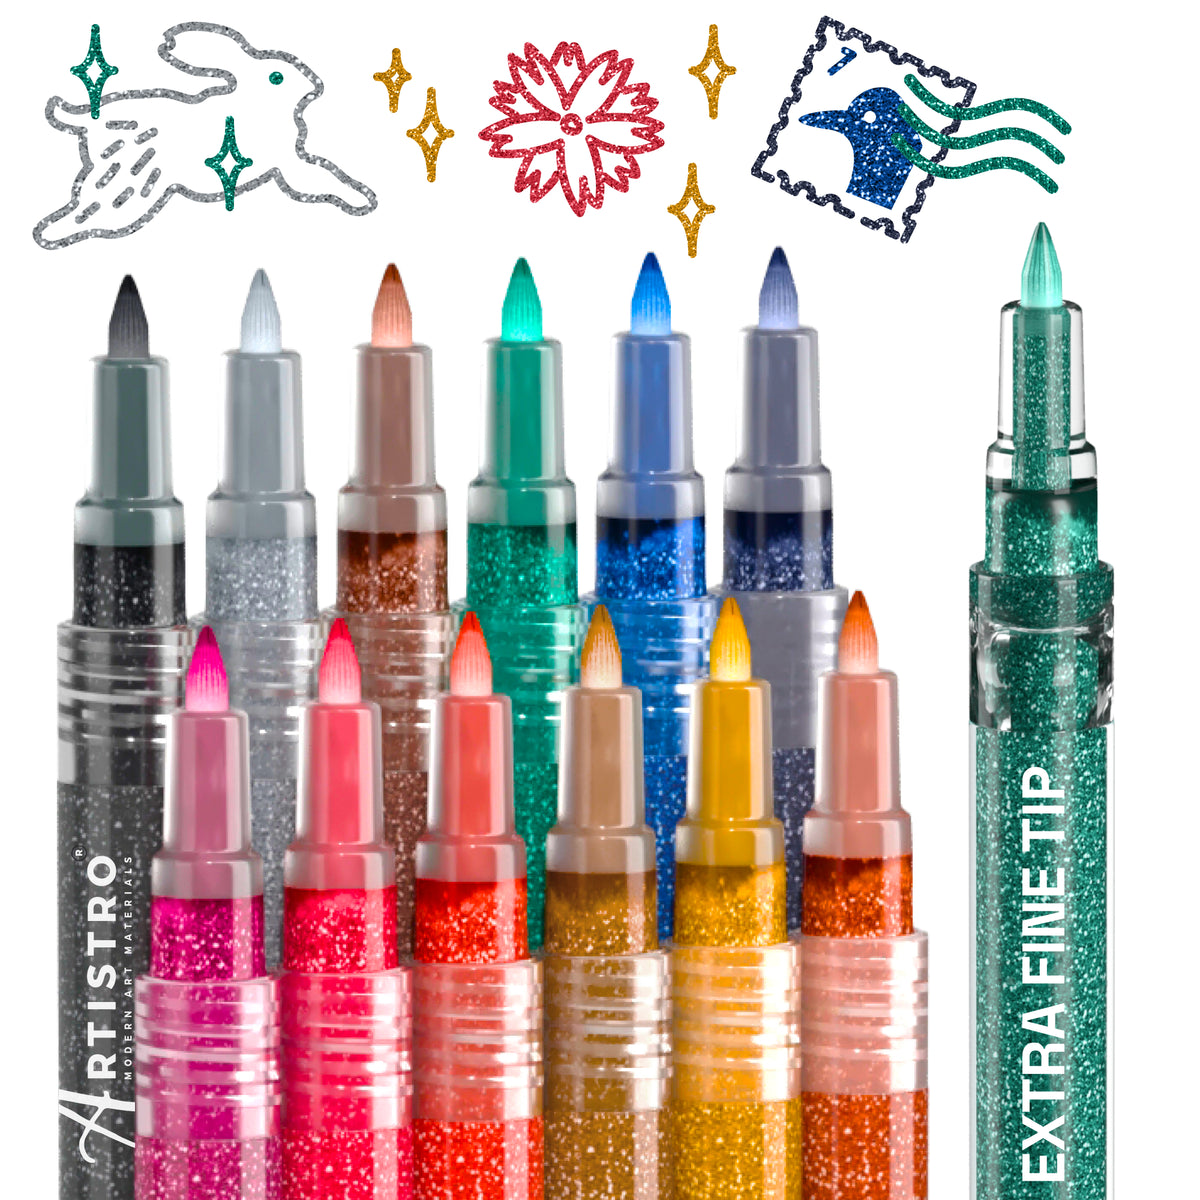  TEVILIK Glitter Markers Pen, 12 Acrylic Glitter Markers Paint  Pens - Shimmer Marker, Fine Point Water-Based Pen For DIY Crafts, Birthday  Cards, Album, Scrapbooking, Rock, Paper, Art Supplies for Girls 